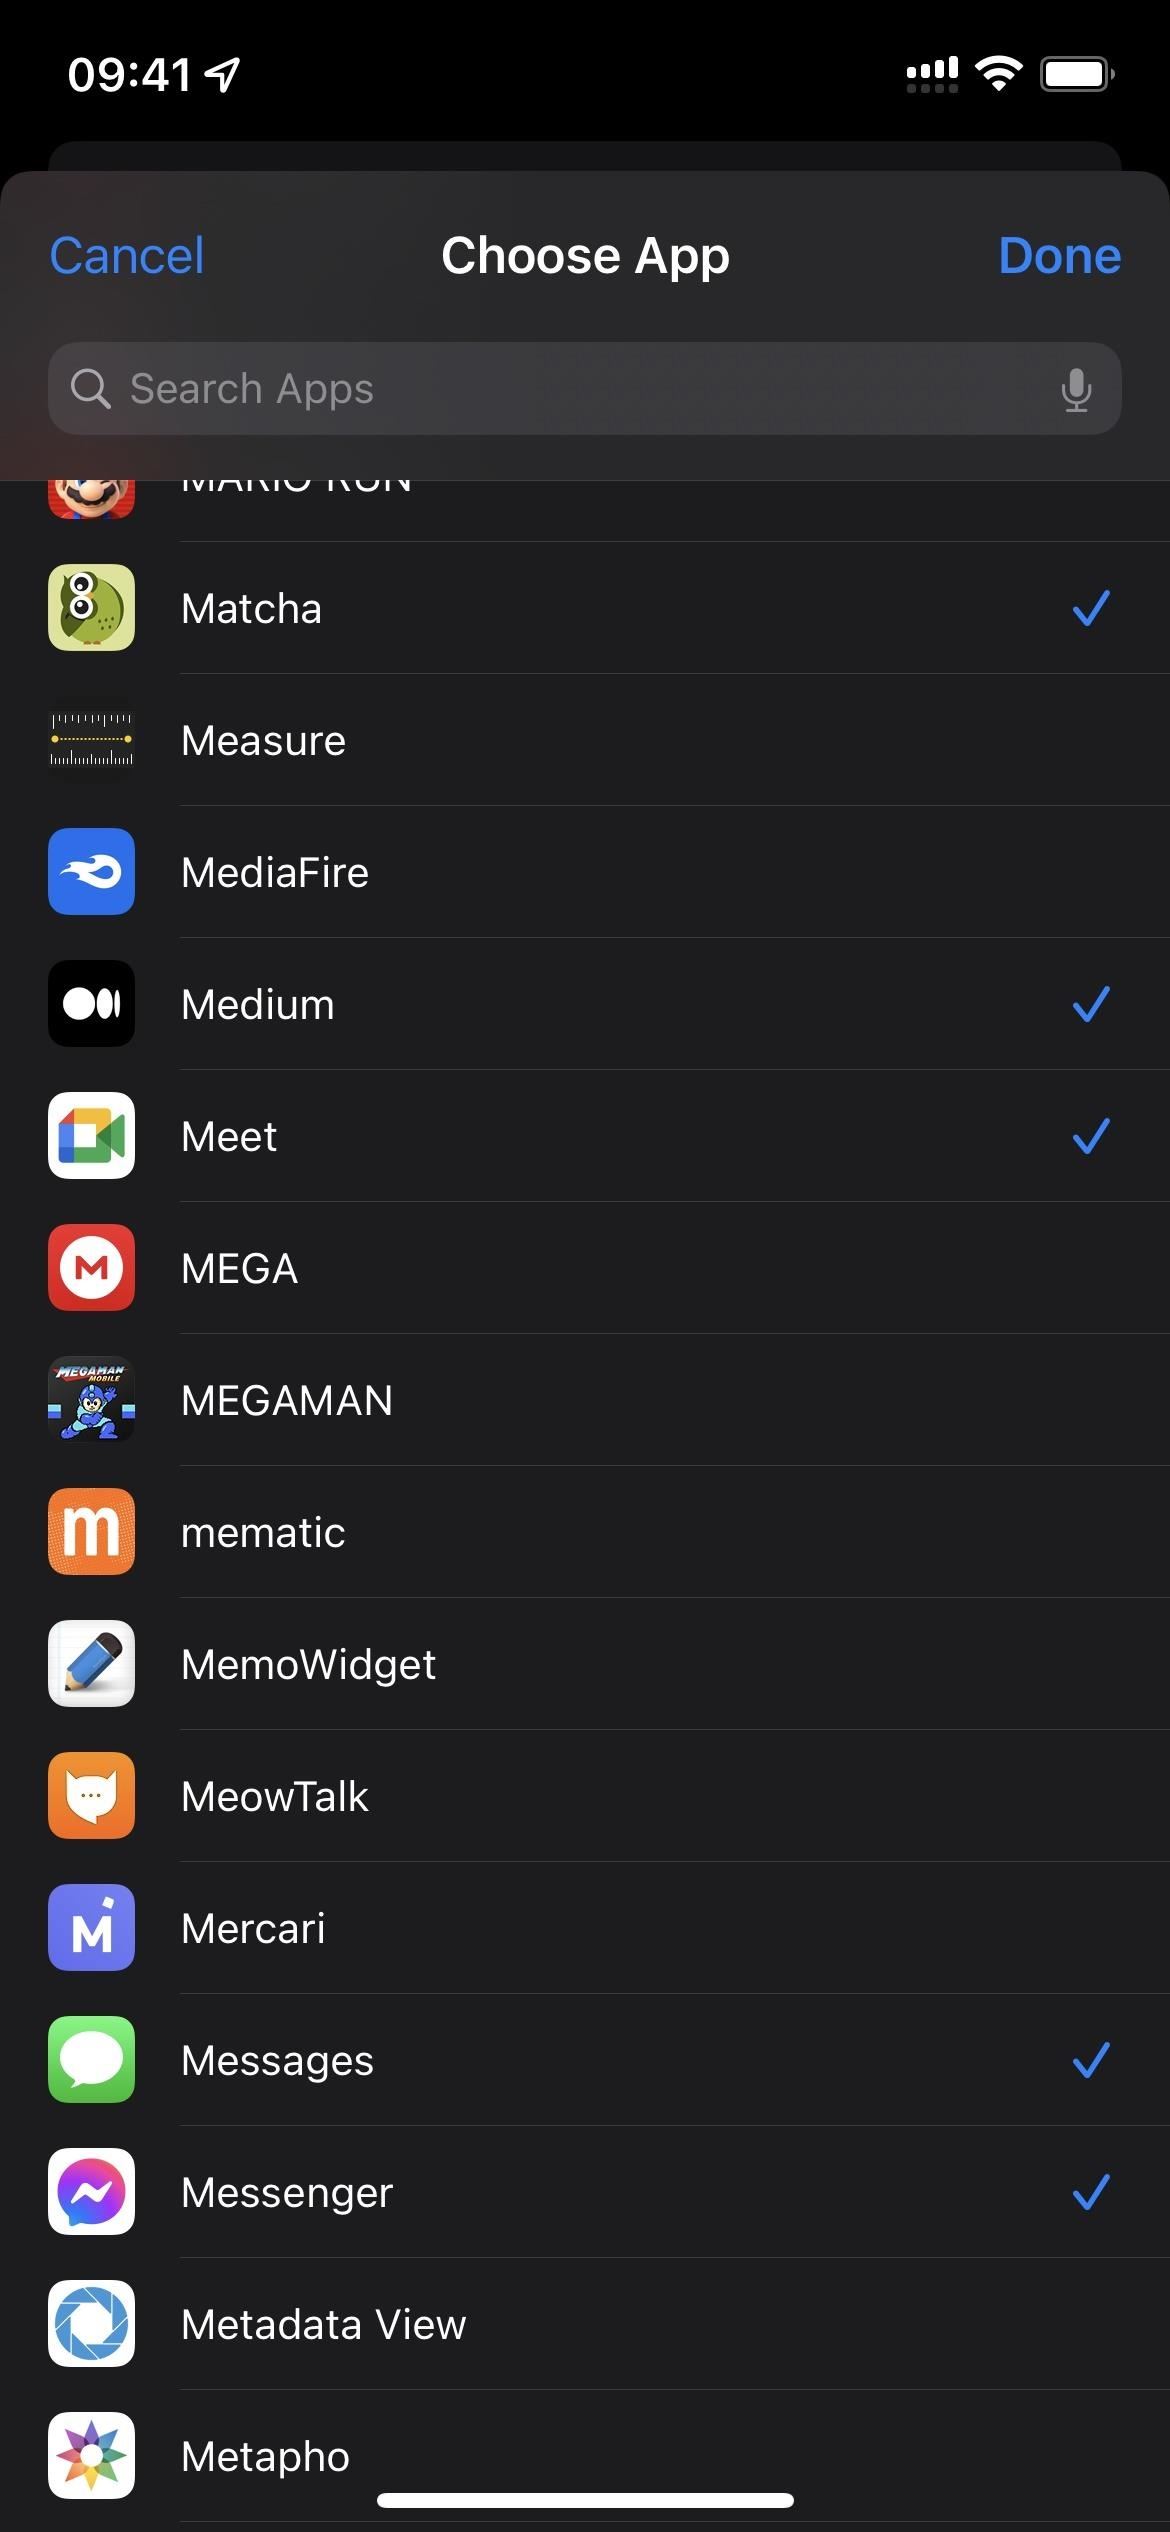 How to Always Use Dark Mode or Light Mode for Any App on Your iPhone